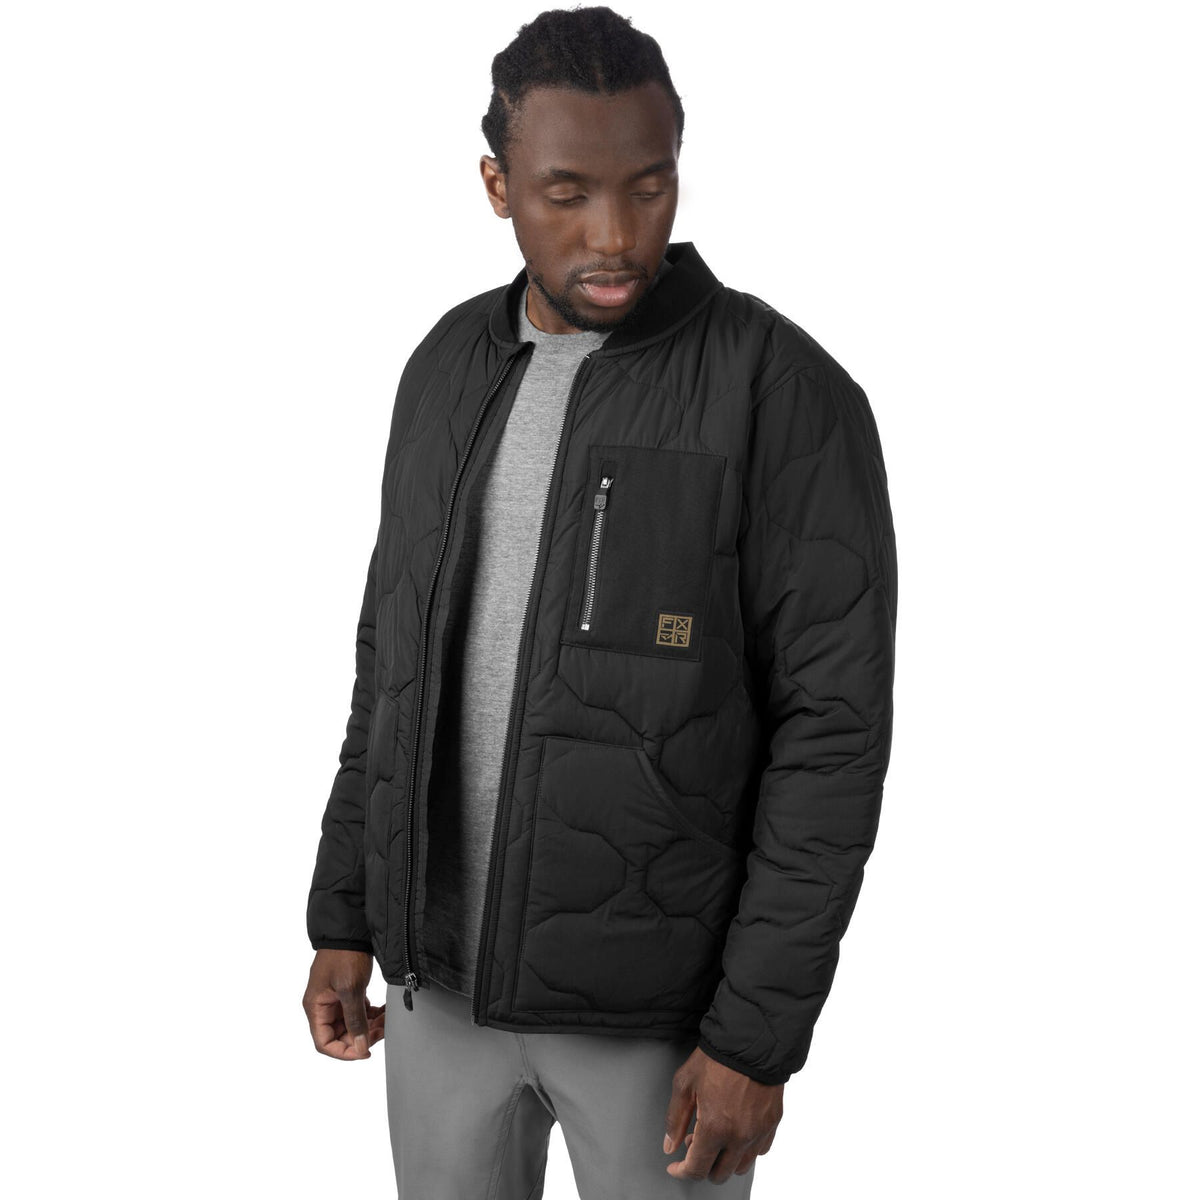 FXR Rig Quilted Jacket